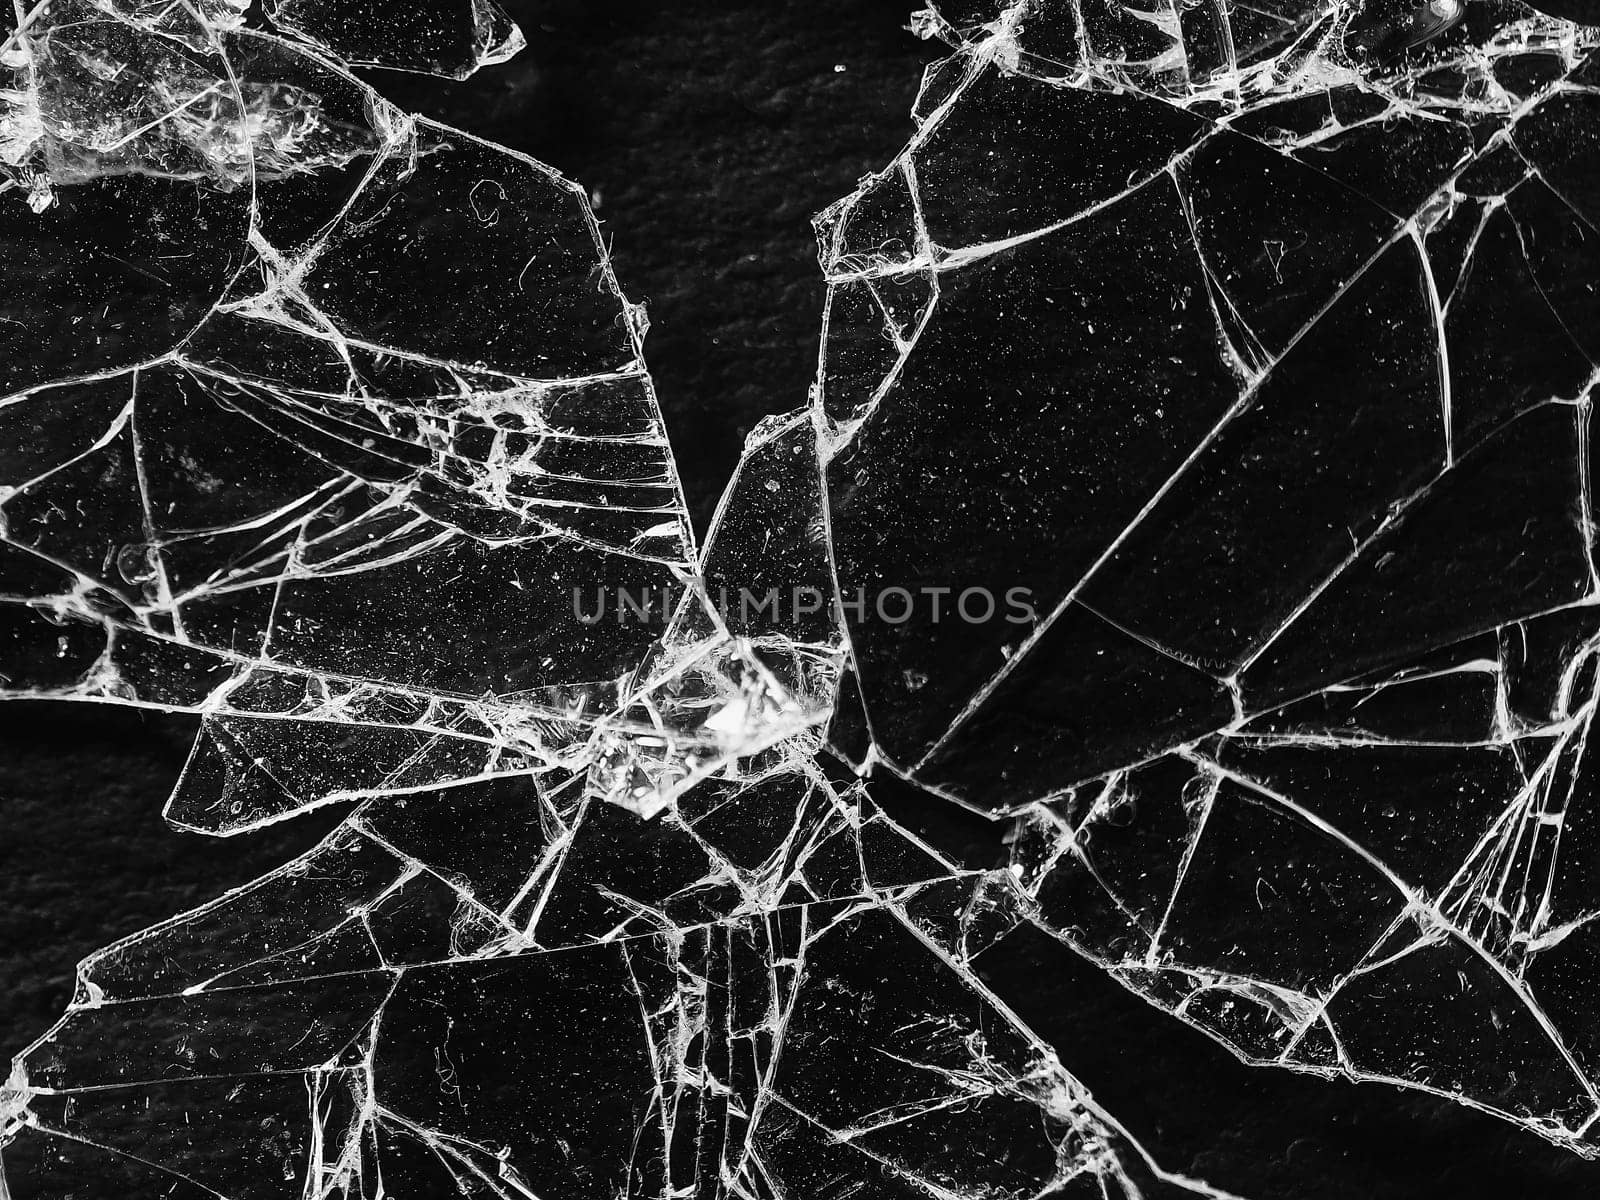 Shards of broken glass on a dark background reflecting highlights, chaotically scattered, some overlapping. Fractures and chips visible in places. Creates a sense of fragility and breaking apart into pieces.